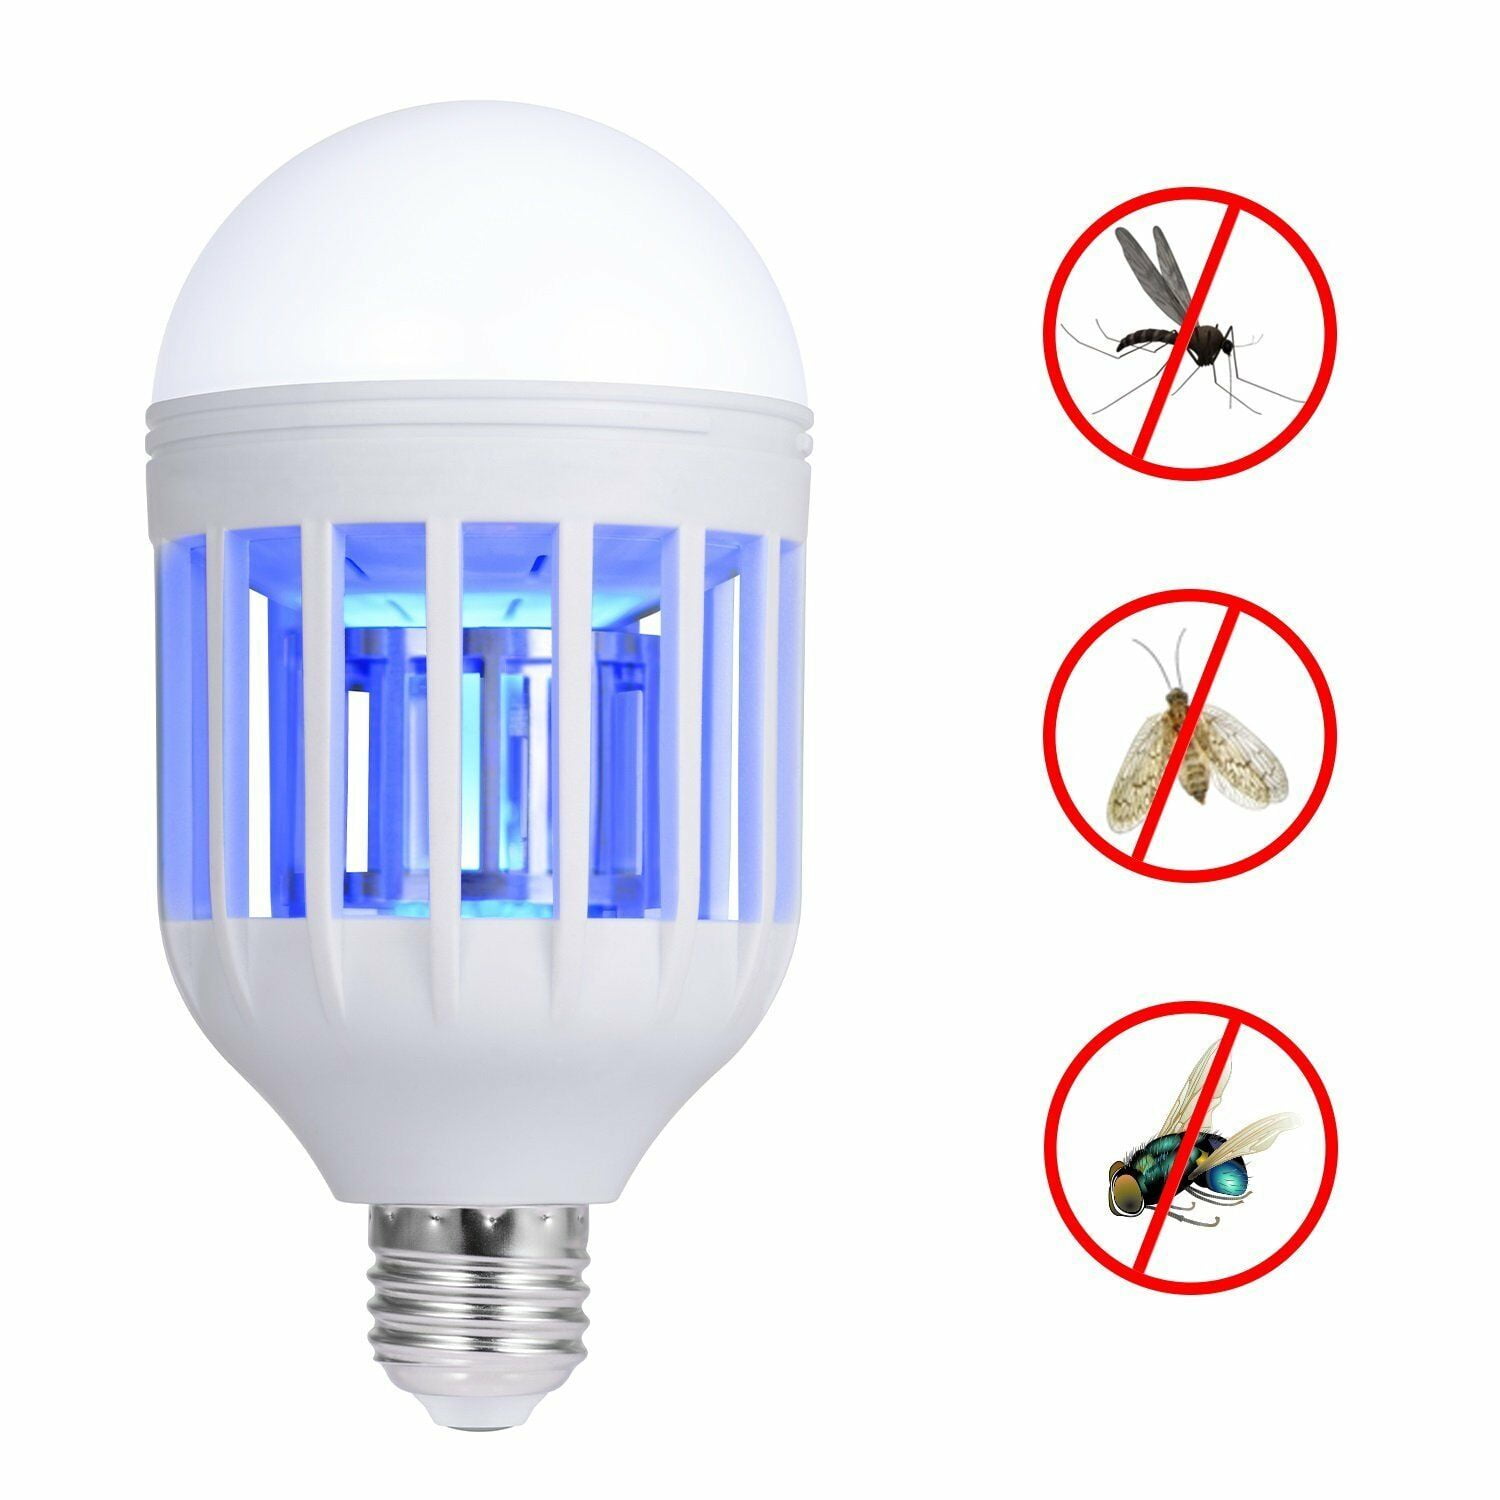 Fly Trap Pest Control Lamp Electric Mosquito Insect Killer Zapper LED Universal 